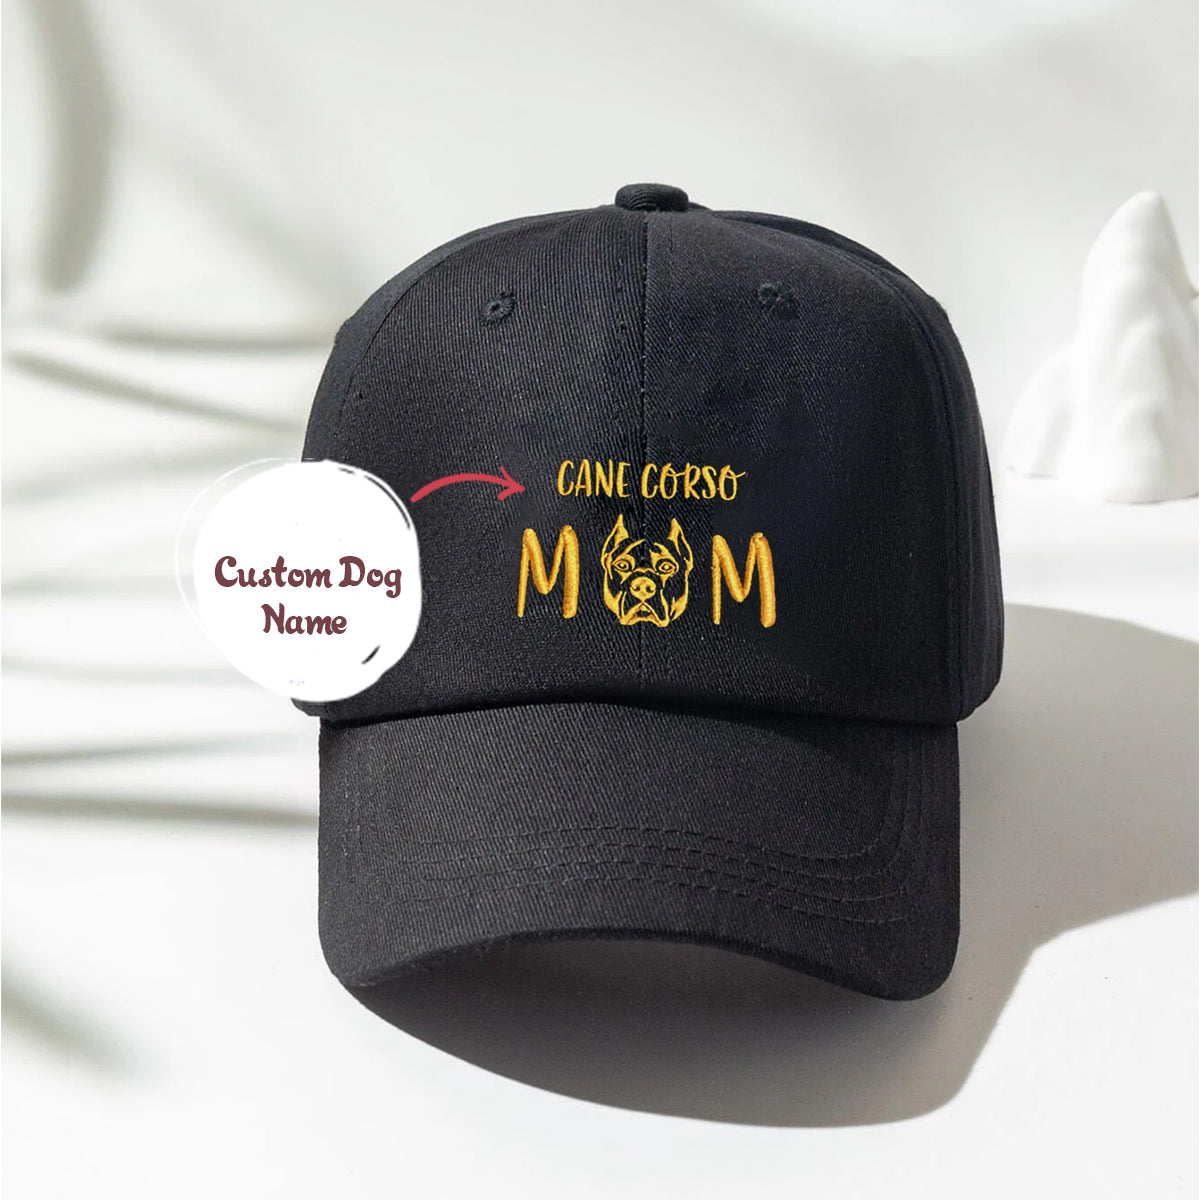 Custom Cane Corso Dog Mom Embroidered Hat, Personalized Hat with Dog Name, Cane Corso Gifts Dog Lovers